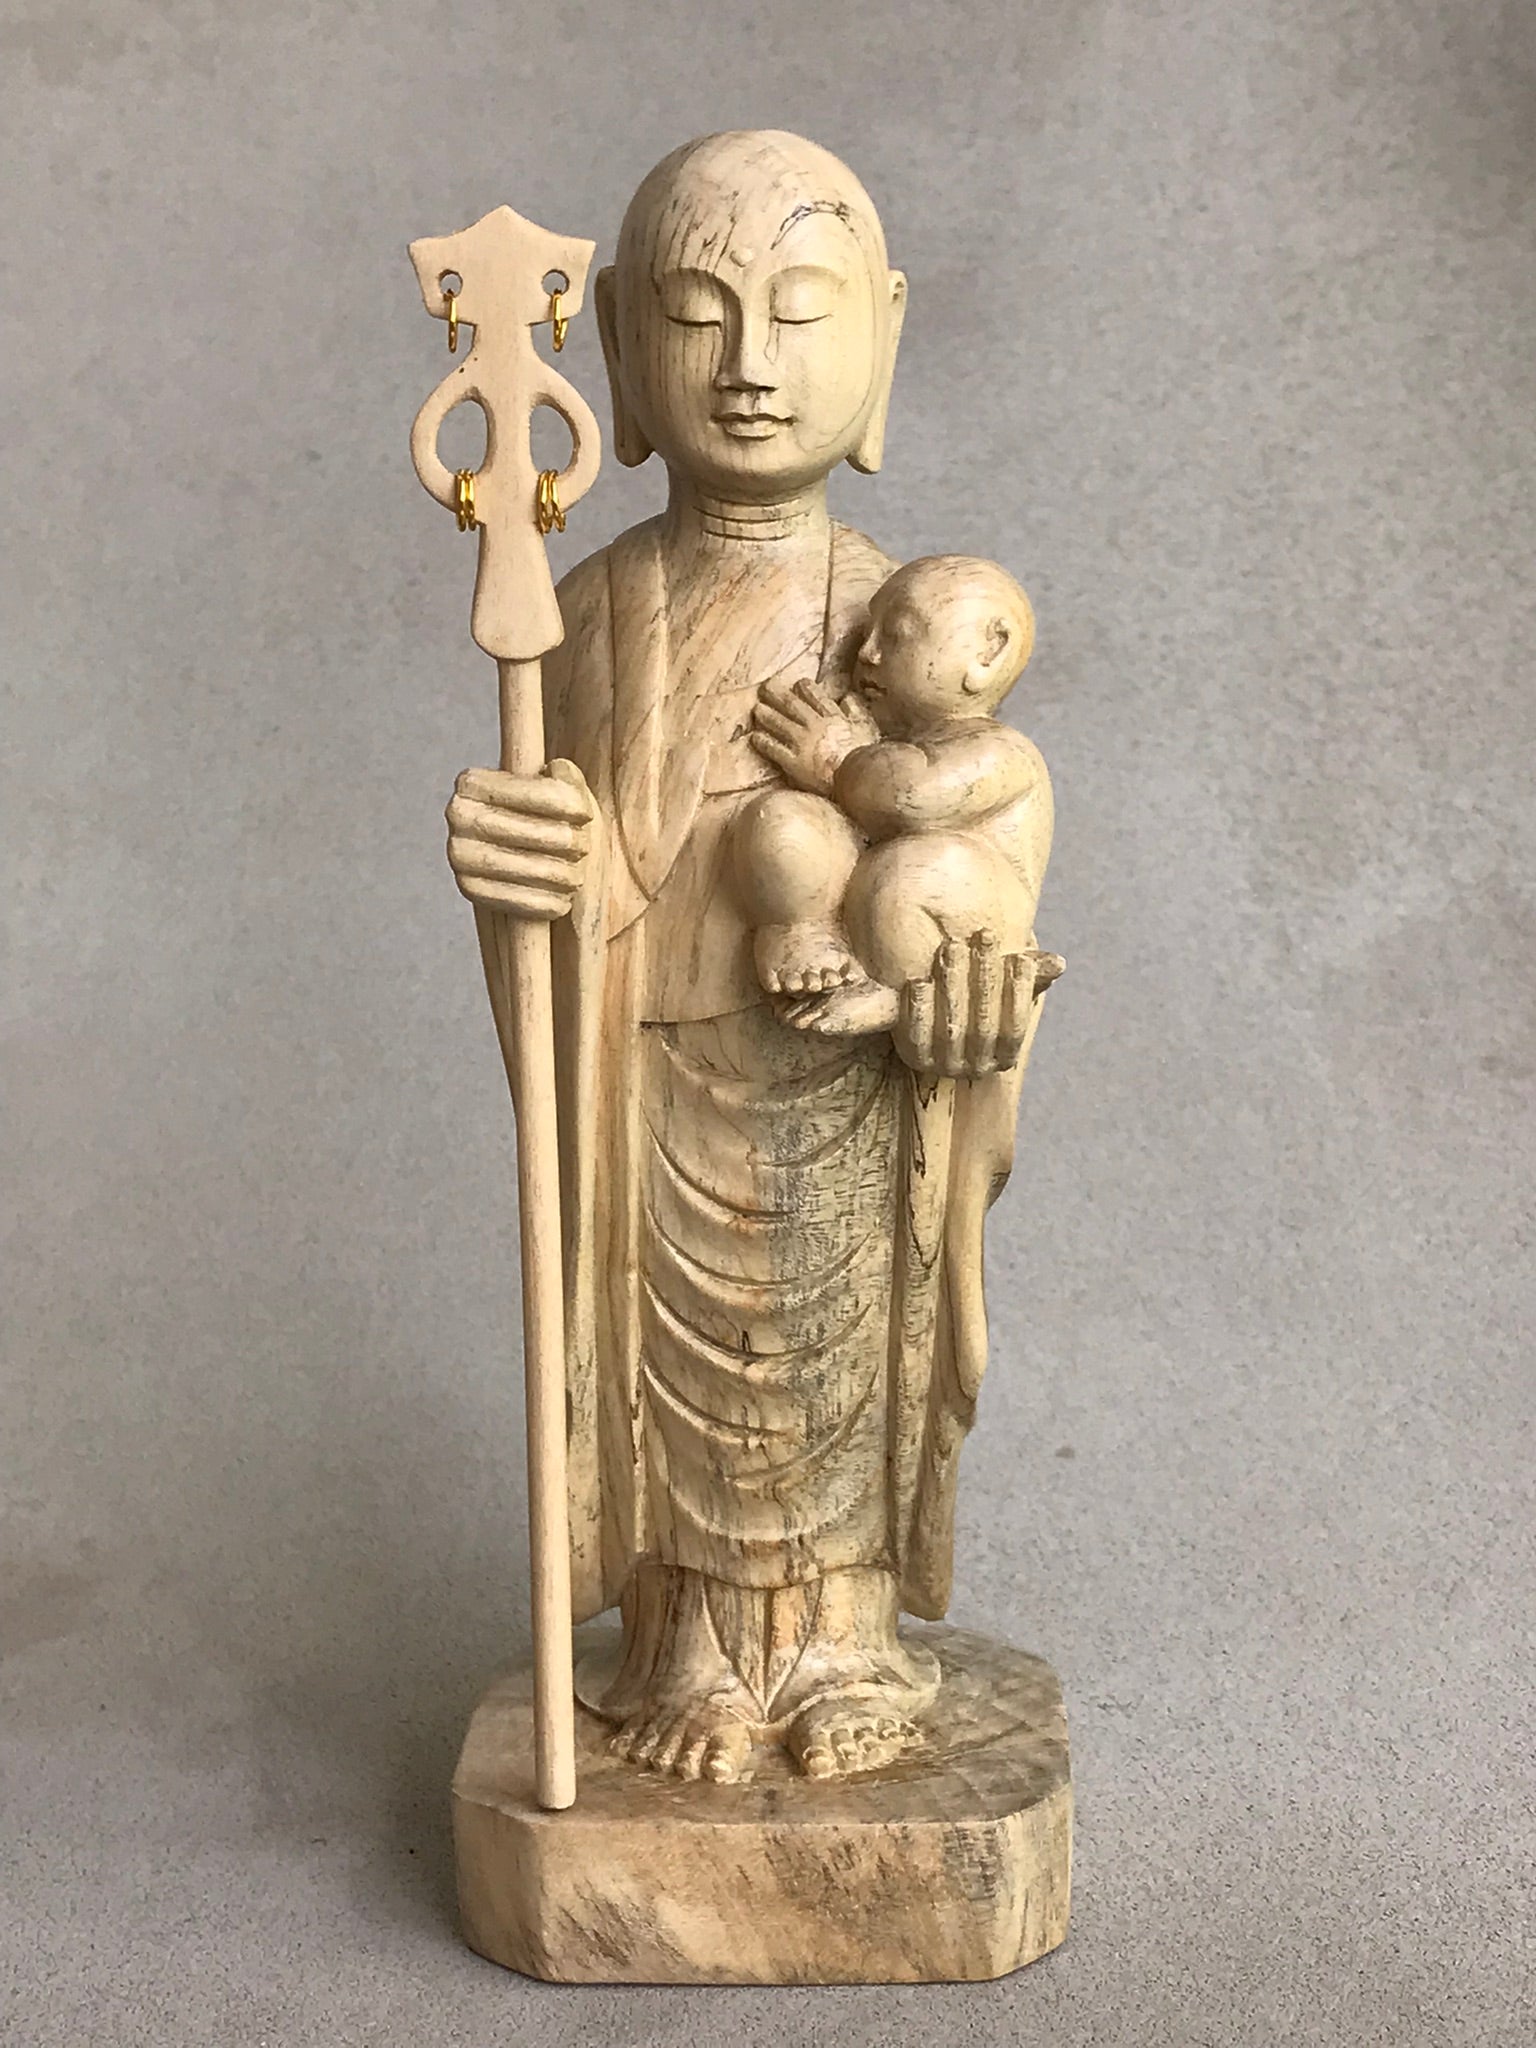 JIzo man standing, holding a staff and a baby, 25cm, 10 inches, color variation in wood from warm light brown to grey grain.